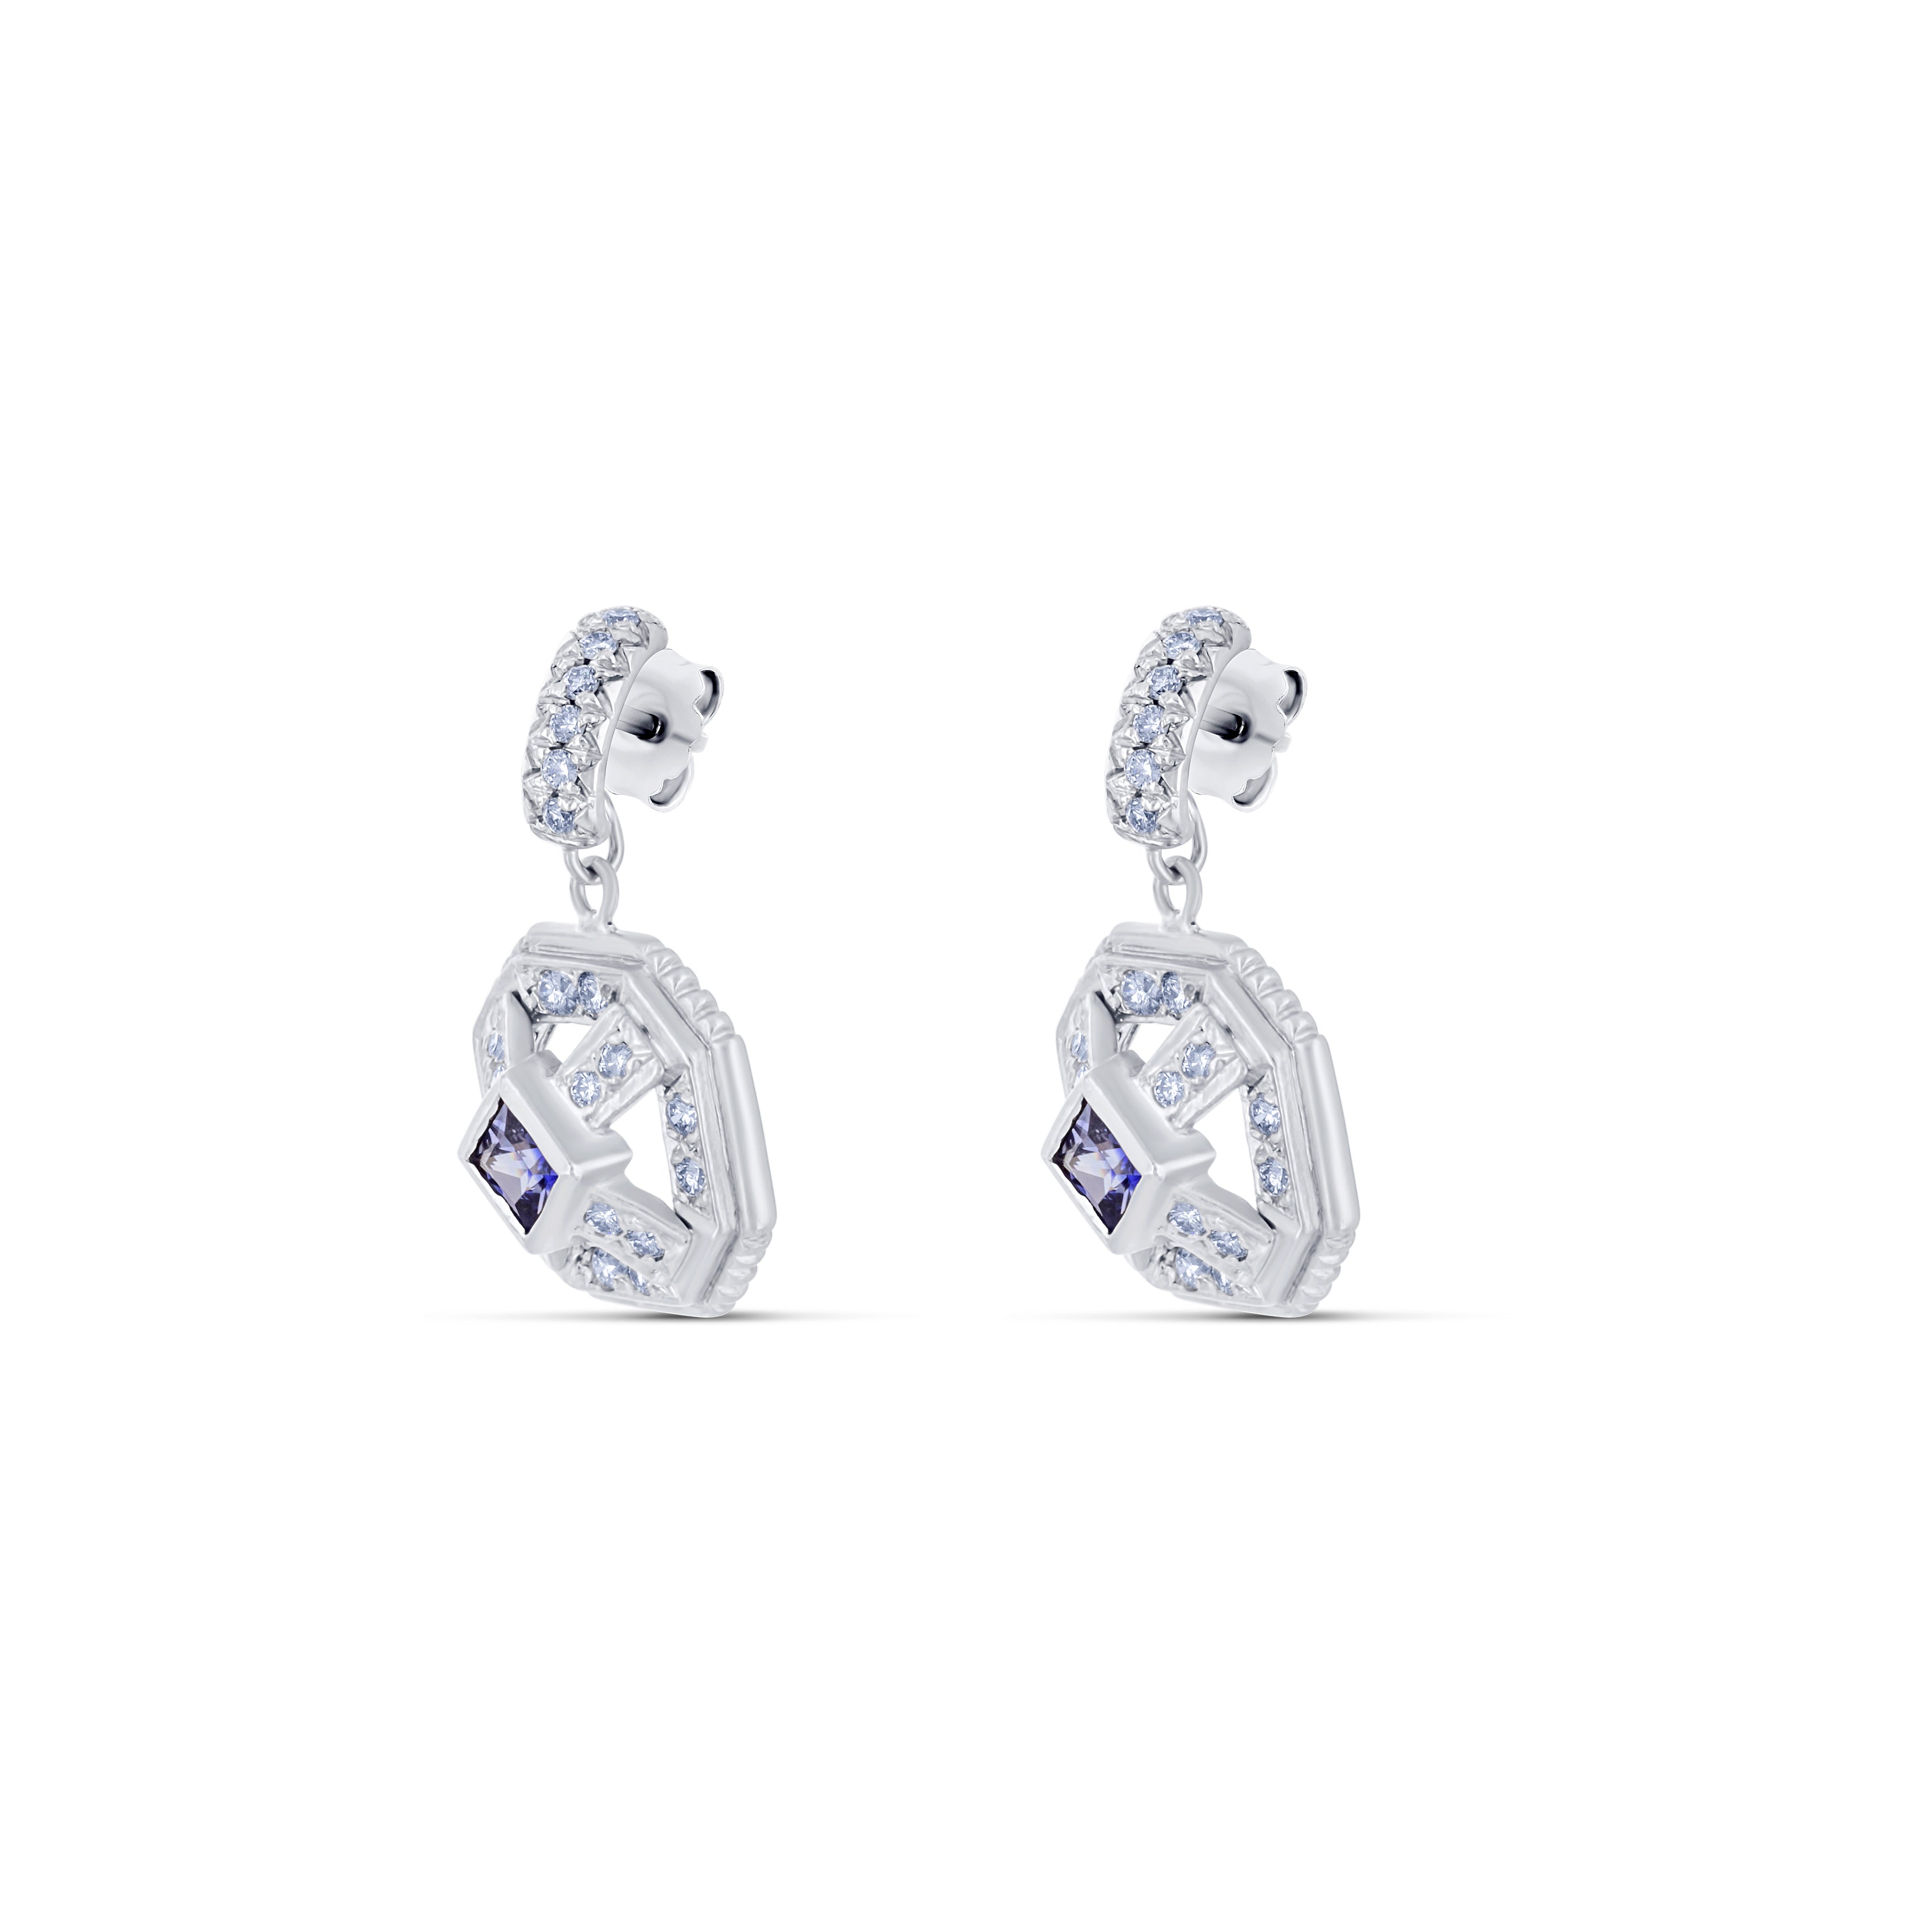 18k White Gold and Diamond Sapphire Drop Earring